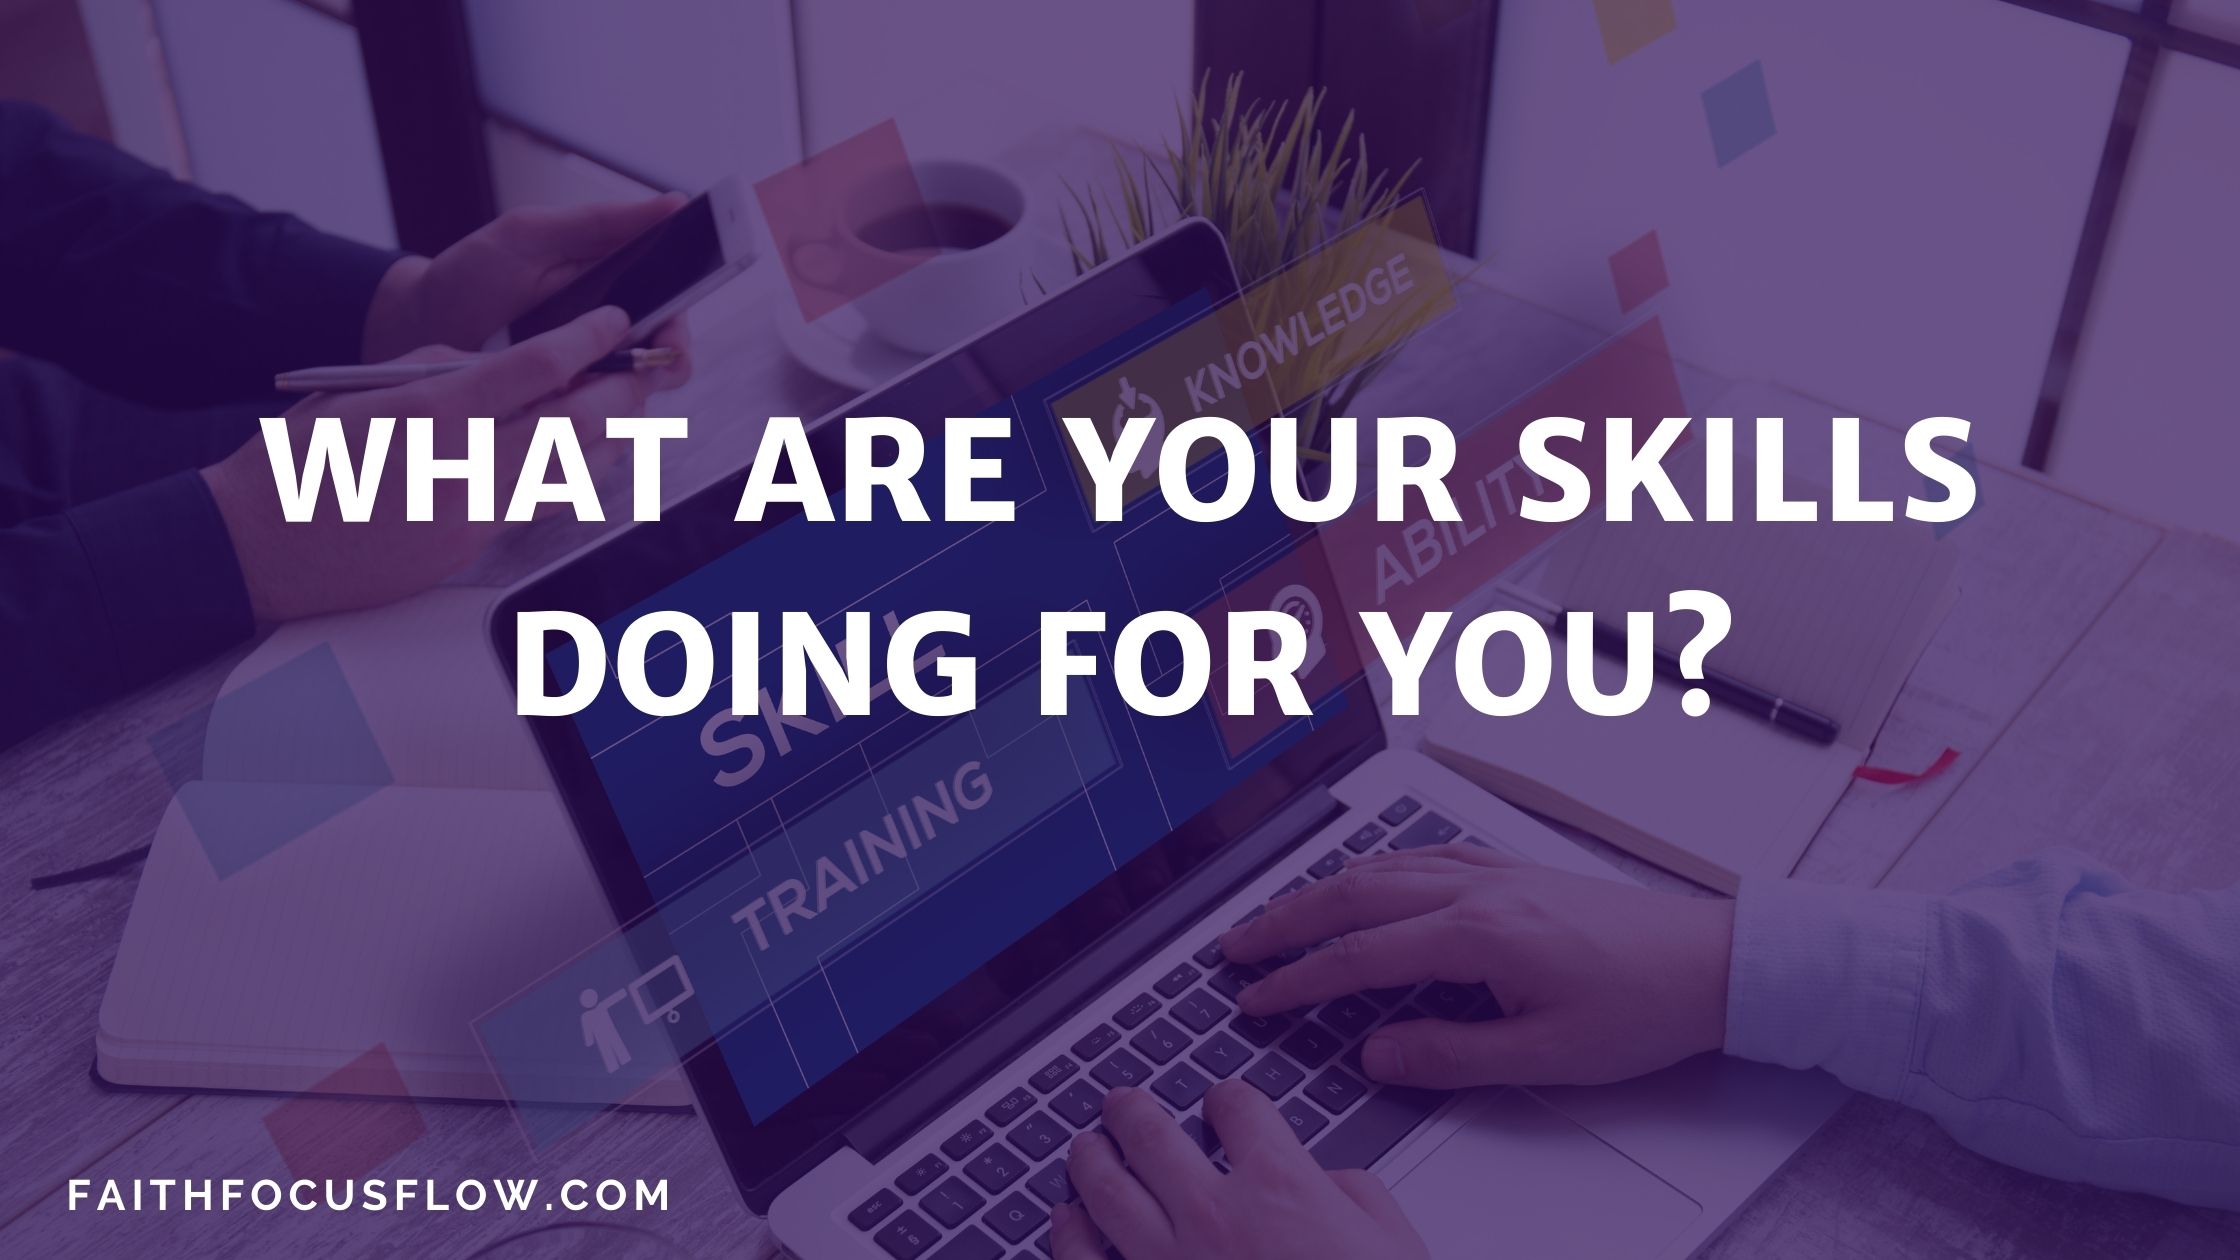 What are your SKILLS doing for you?